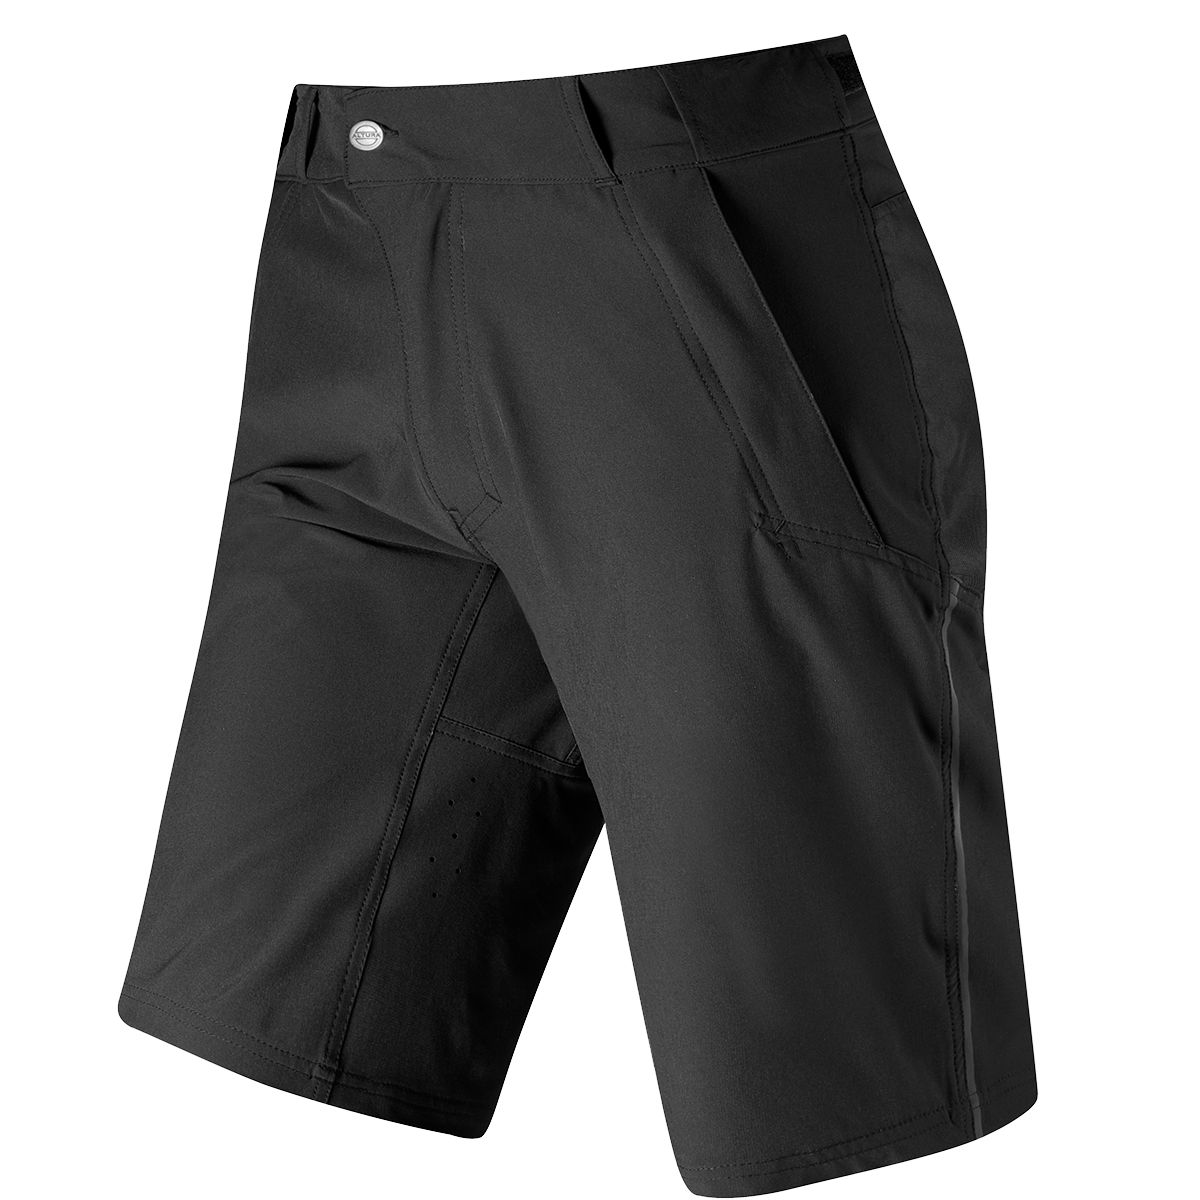 Altura All Roads X Baggy Short XX-LARGE Only - £24 | Shorts - Baggy ...